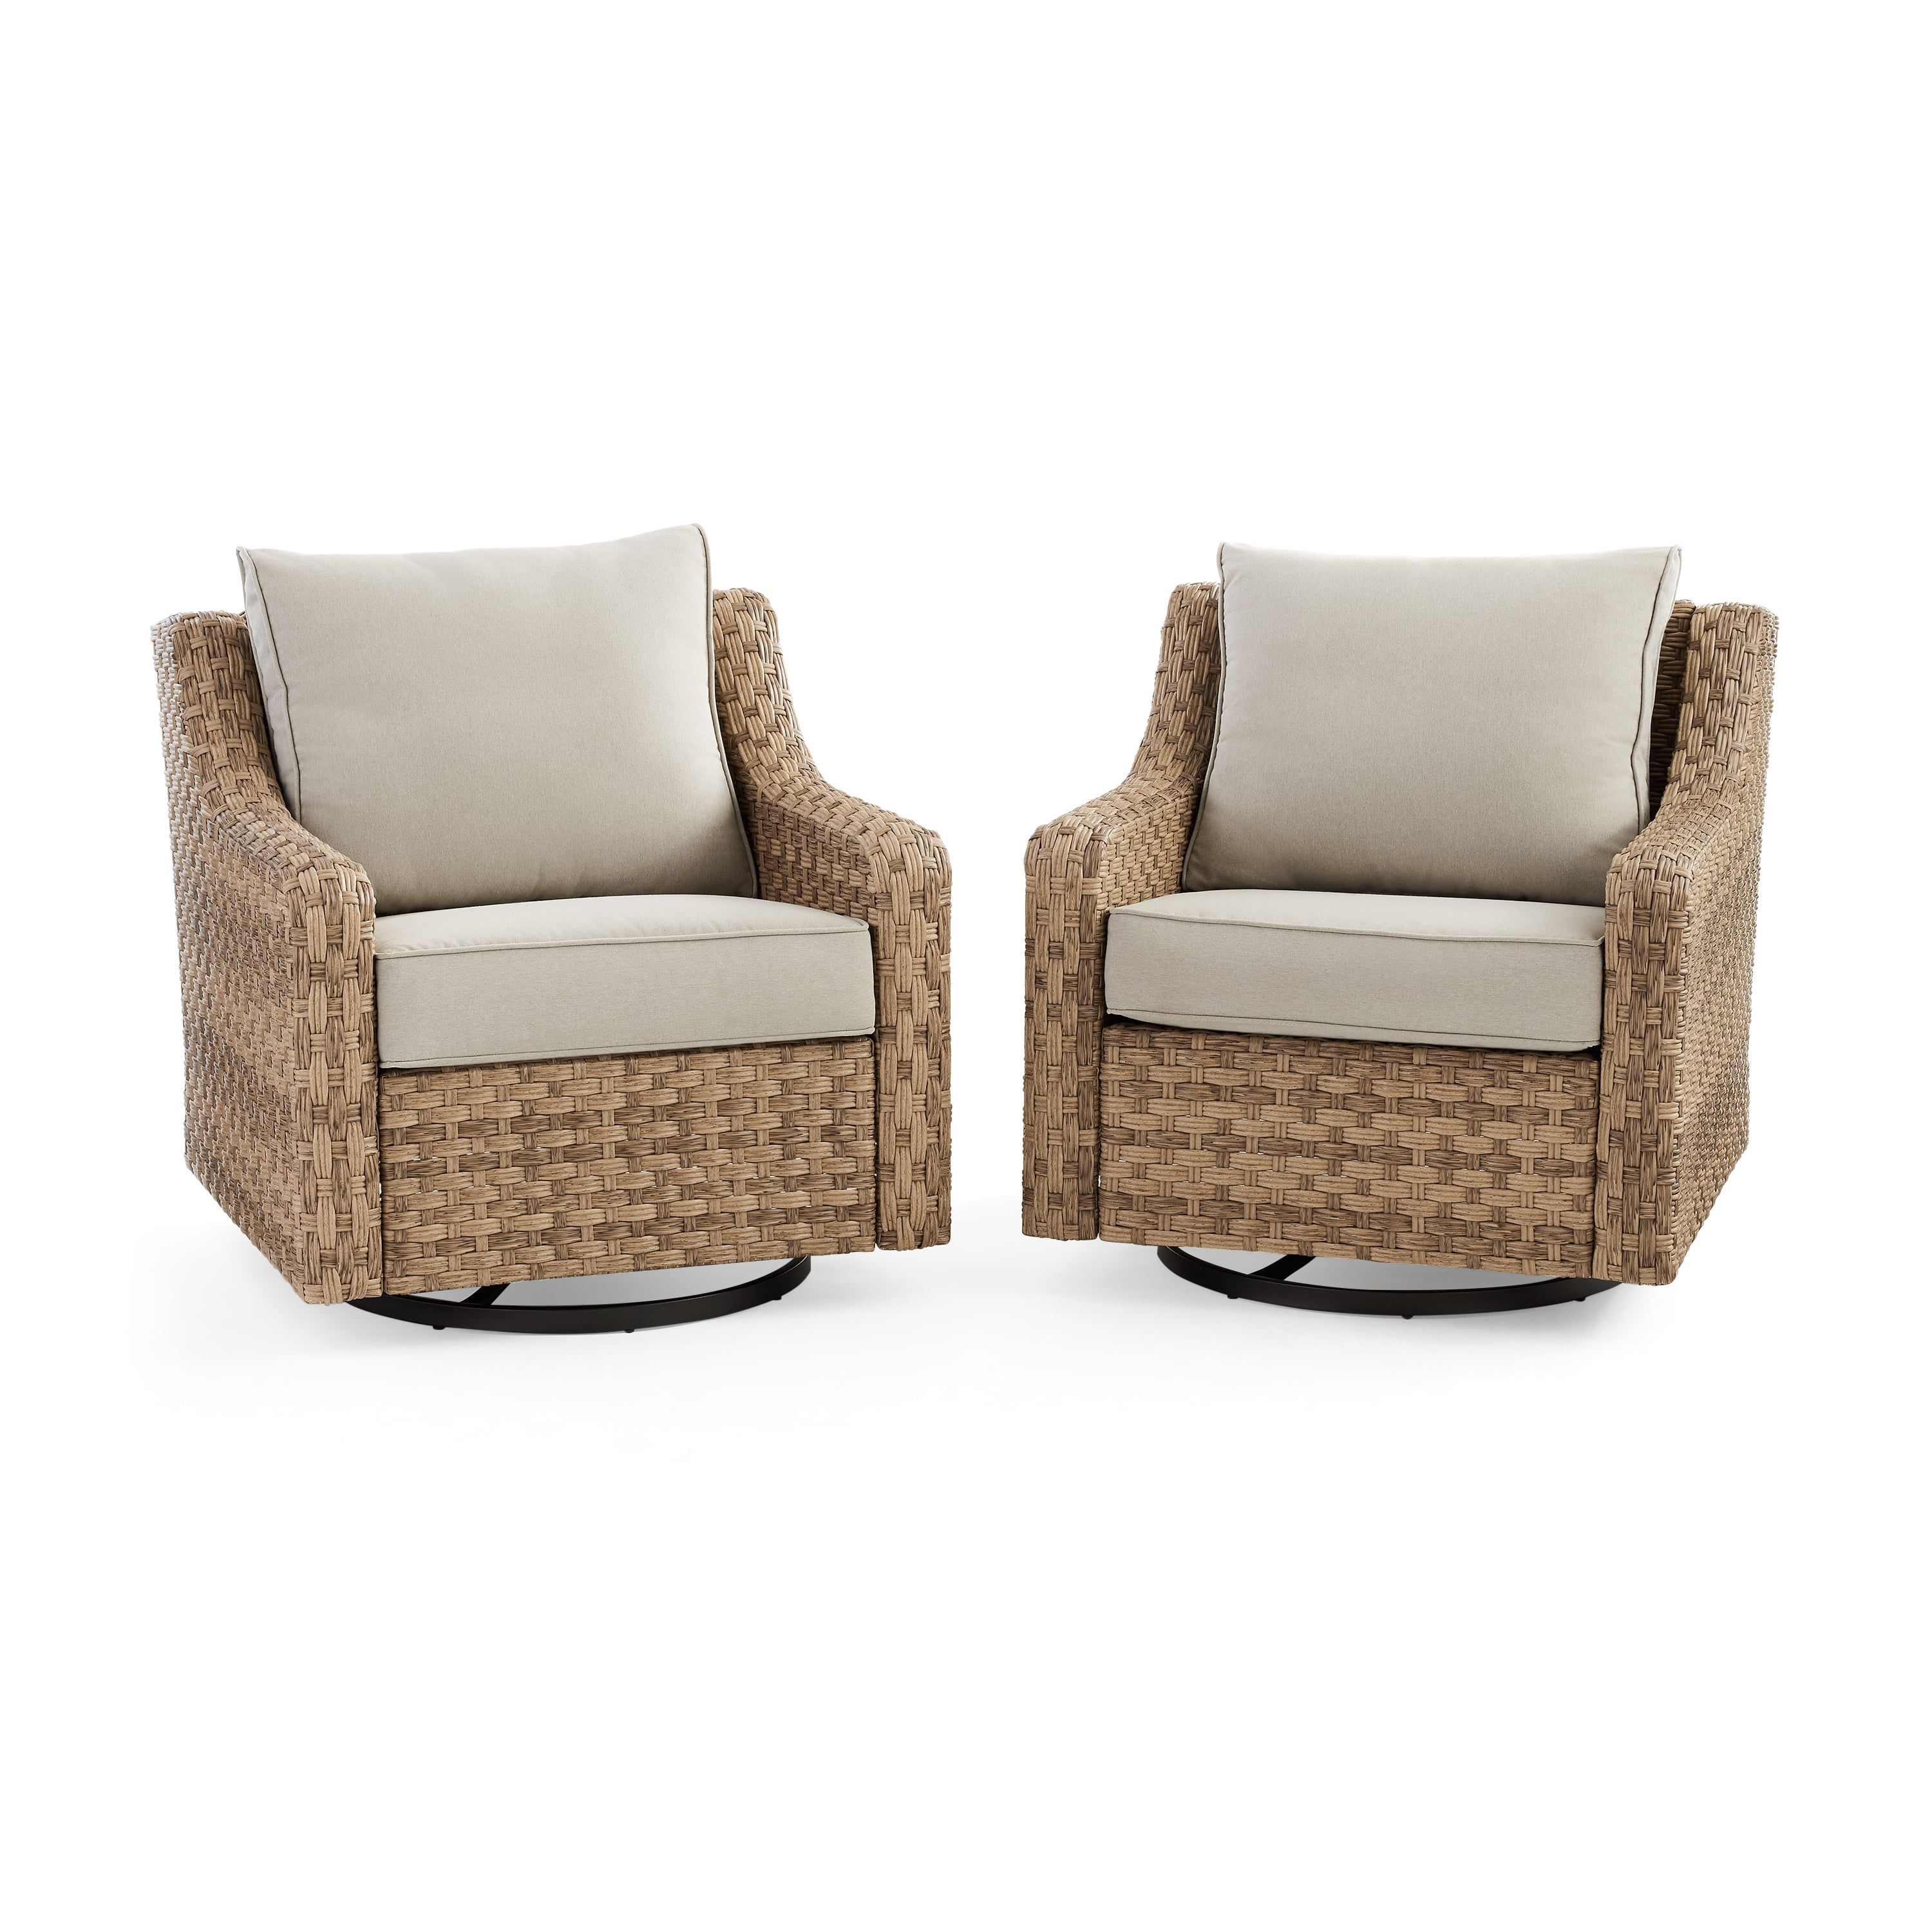 Most Recent 2 Piece Swivel Gliders With Patio Cover Pertaining To Better Homes & Gardens River Oaks 2 Piece Swivel Glider With Patio Cover –  Walmart (Photo 1 of 15)